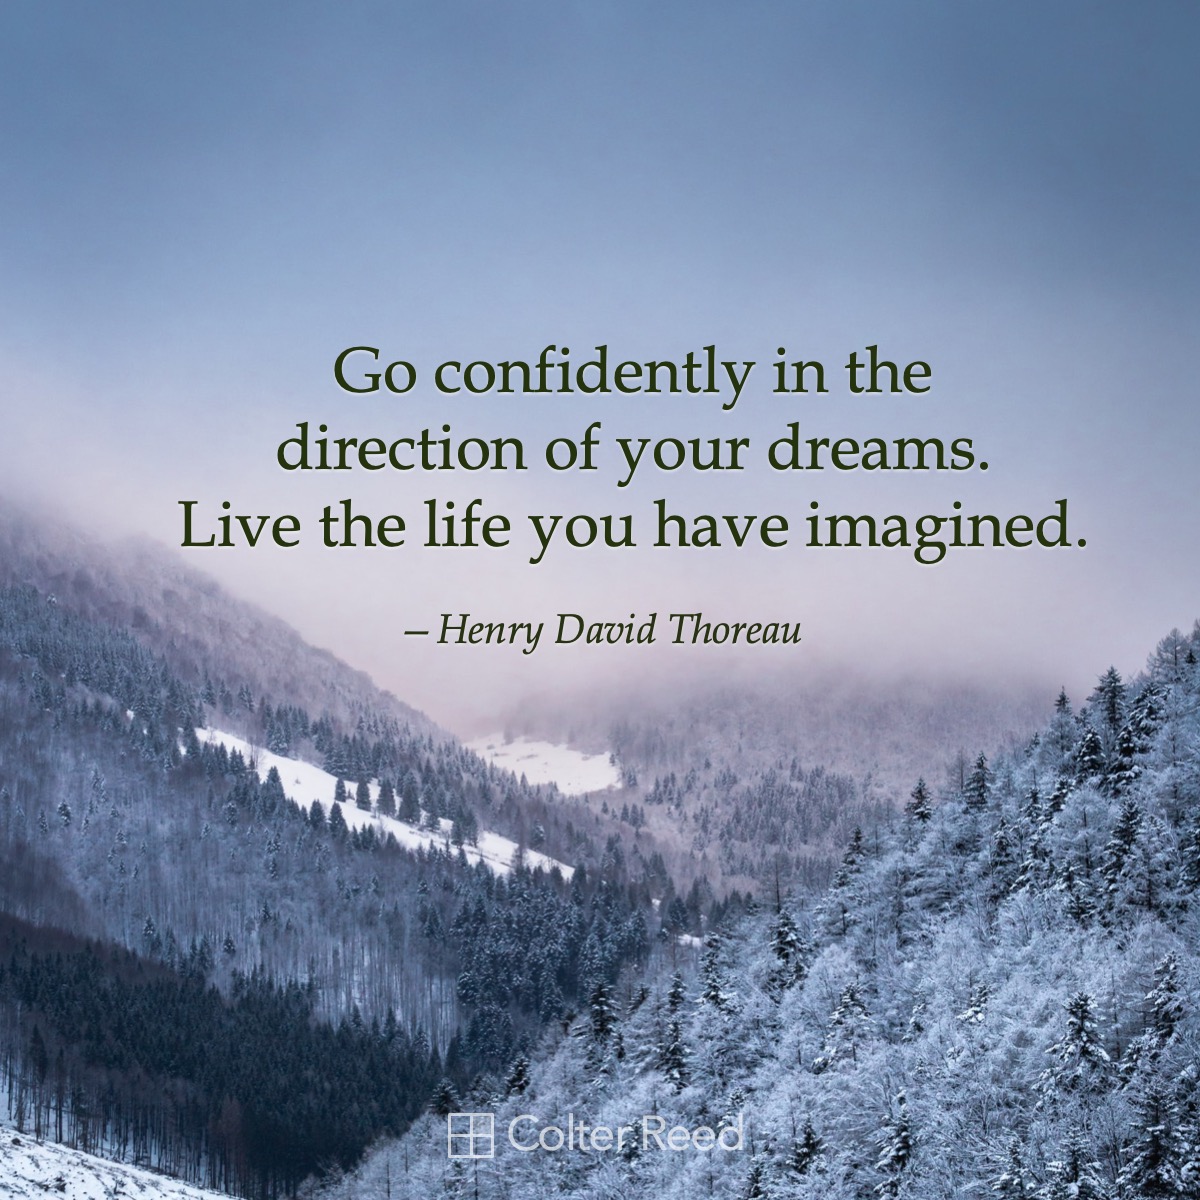 Go confidently in the direction of your dreams. Live the life you have imagined. —Henry David Thoreau